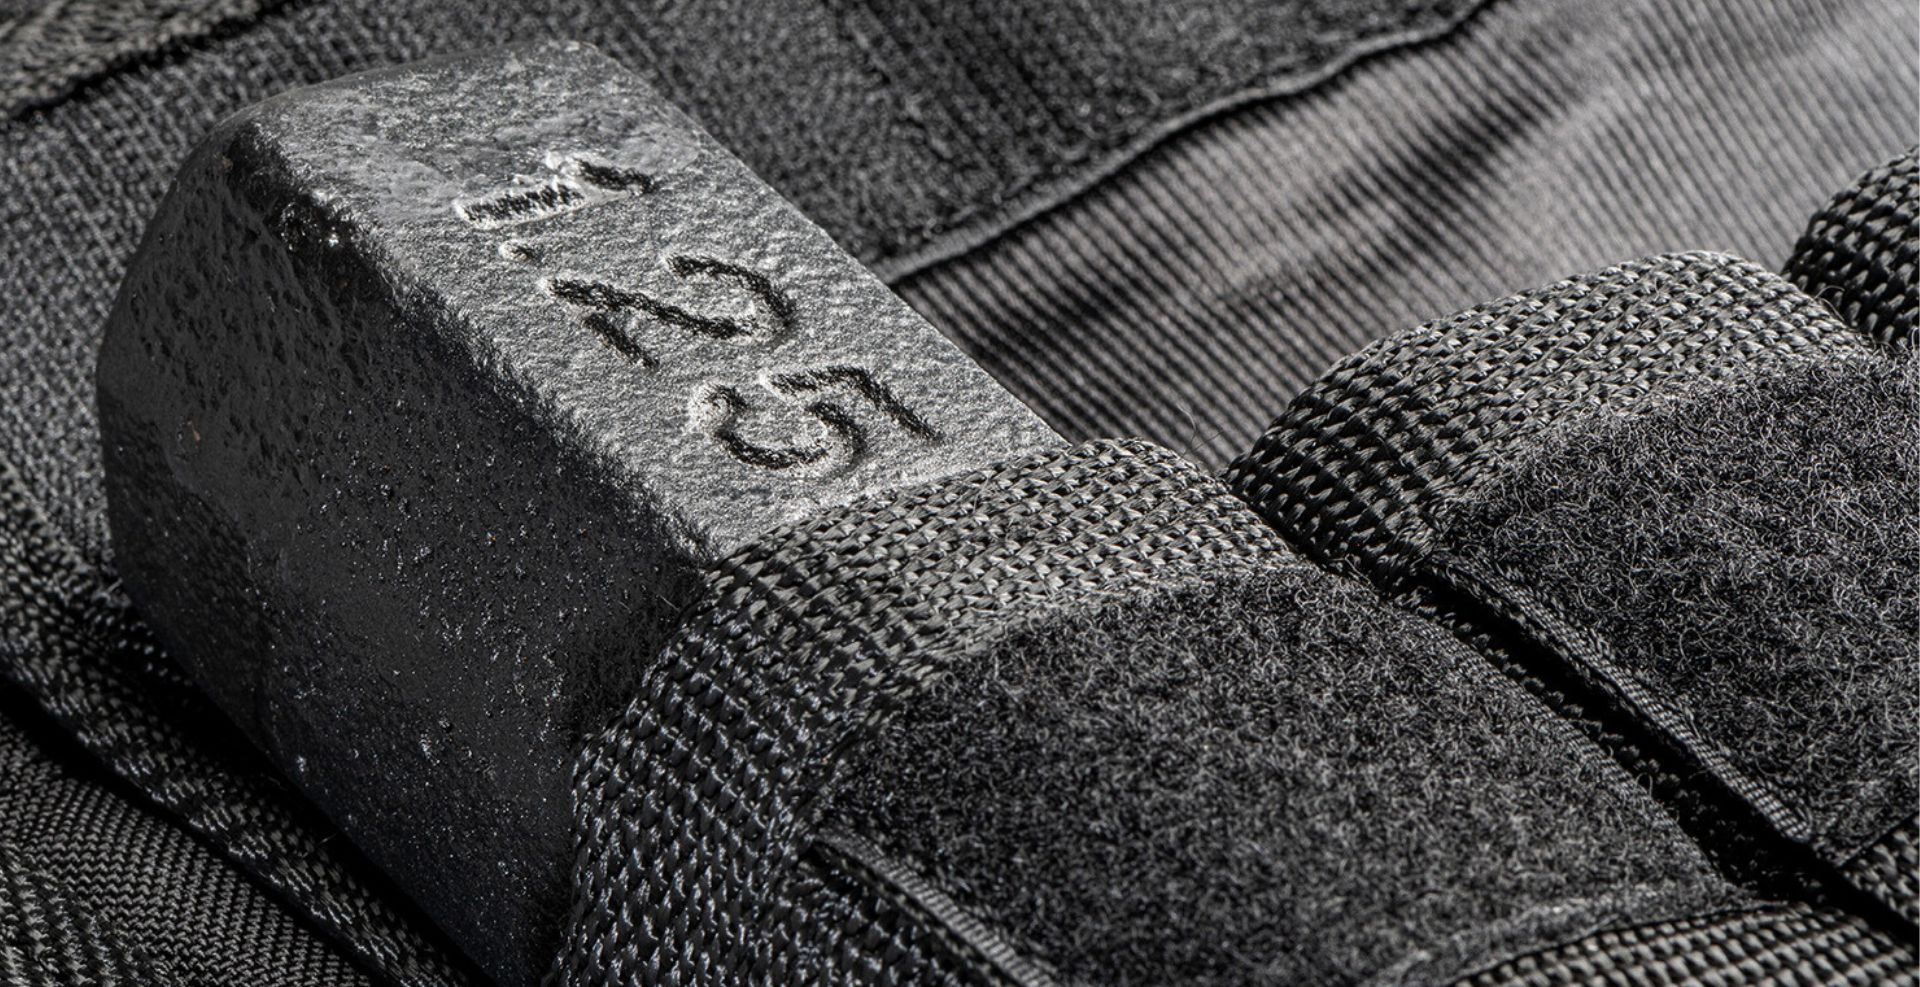 removable weights are a top feature of this weight vest